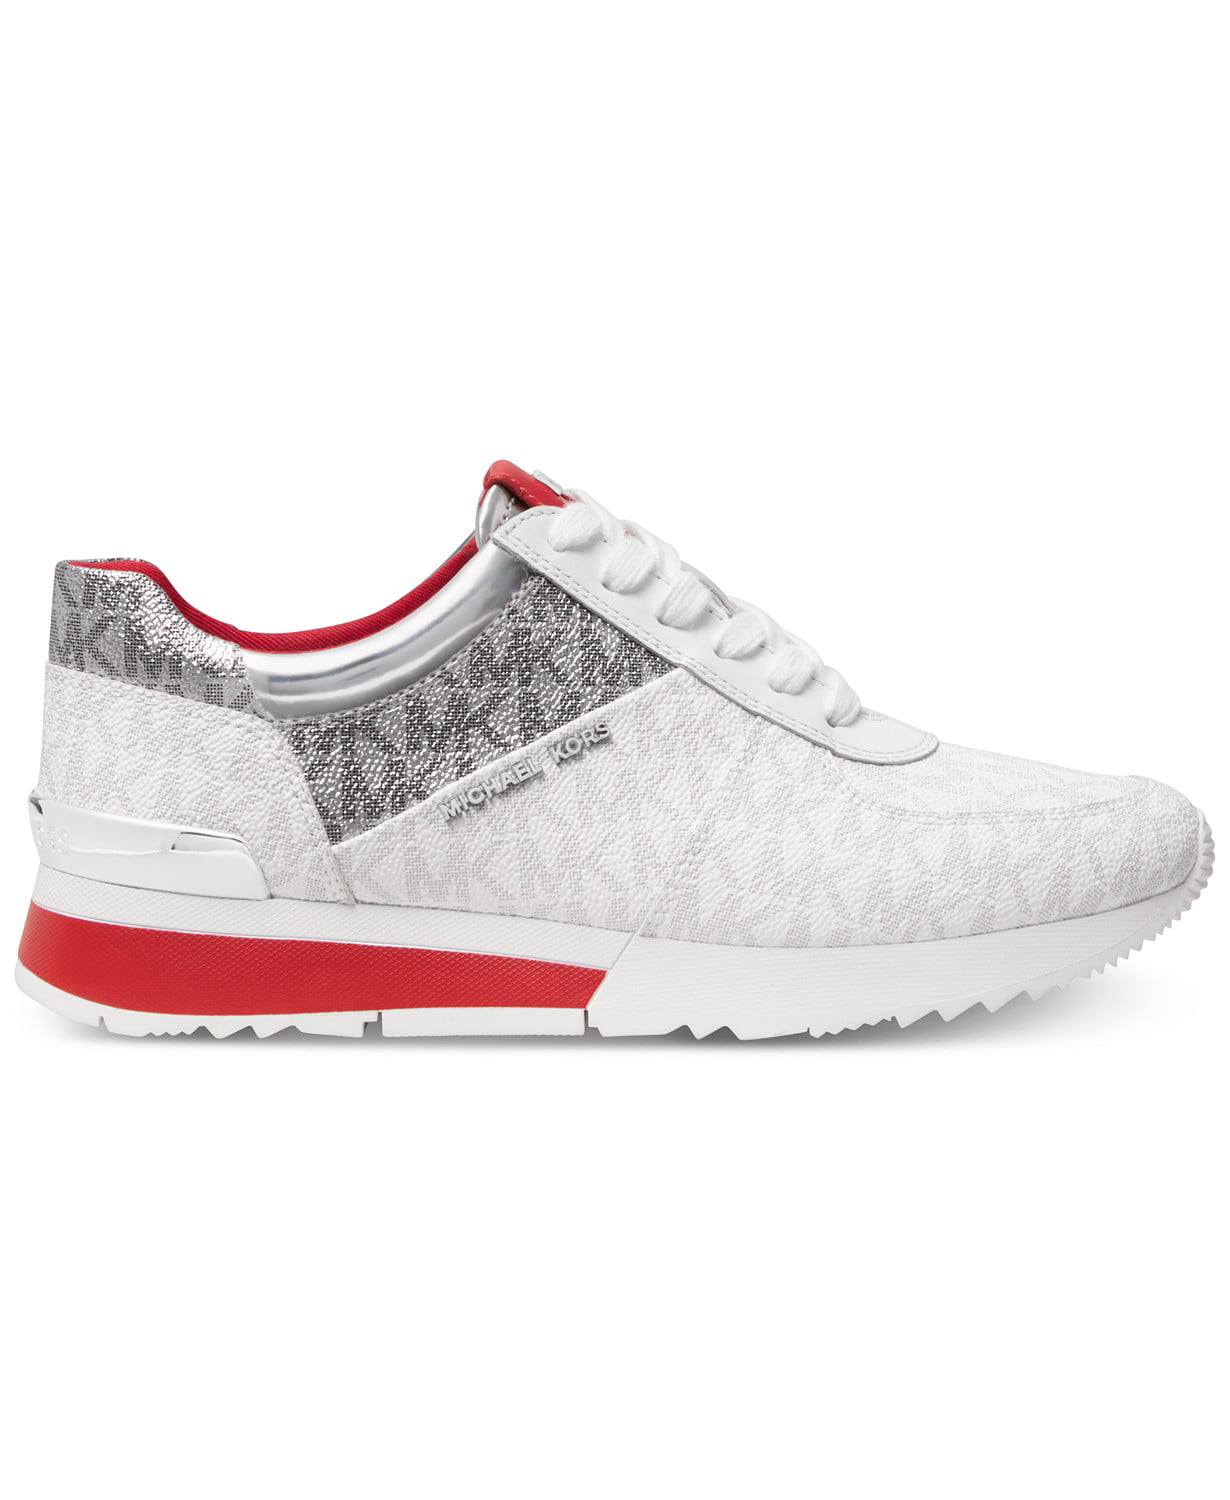 michael kors white and red sneakers